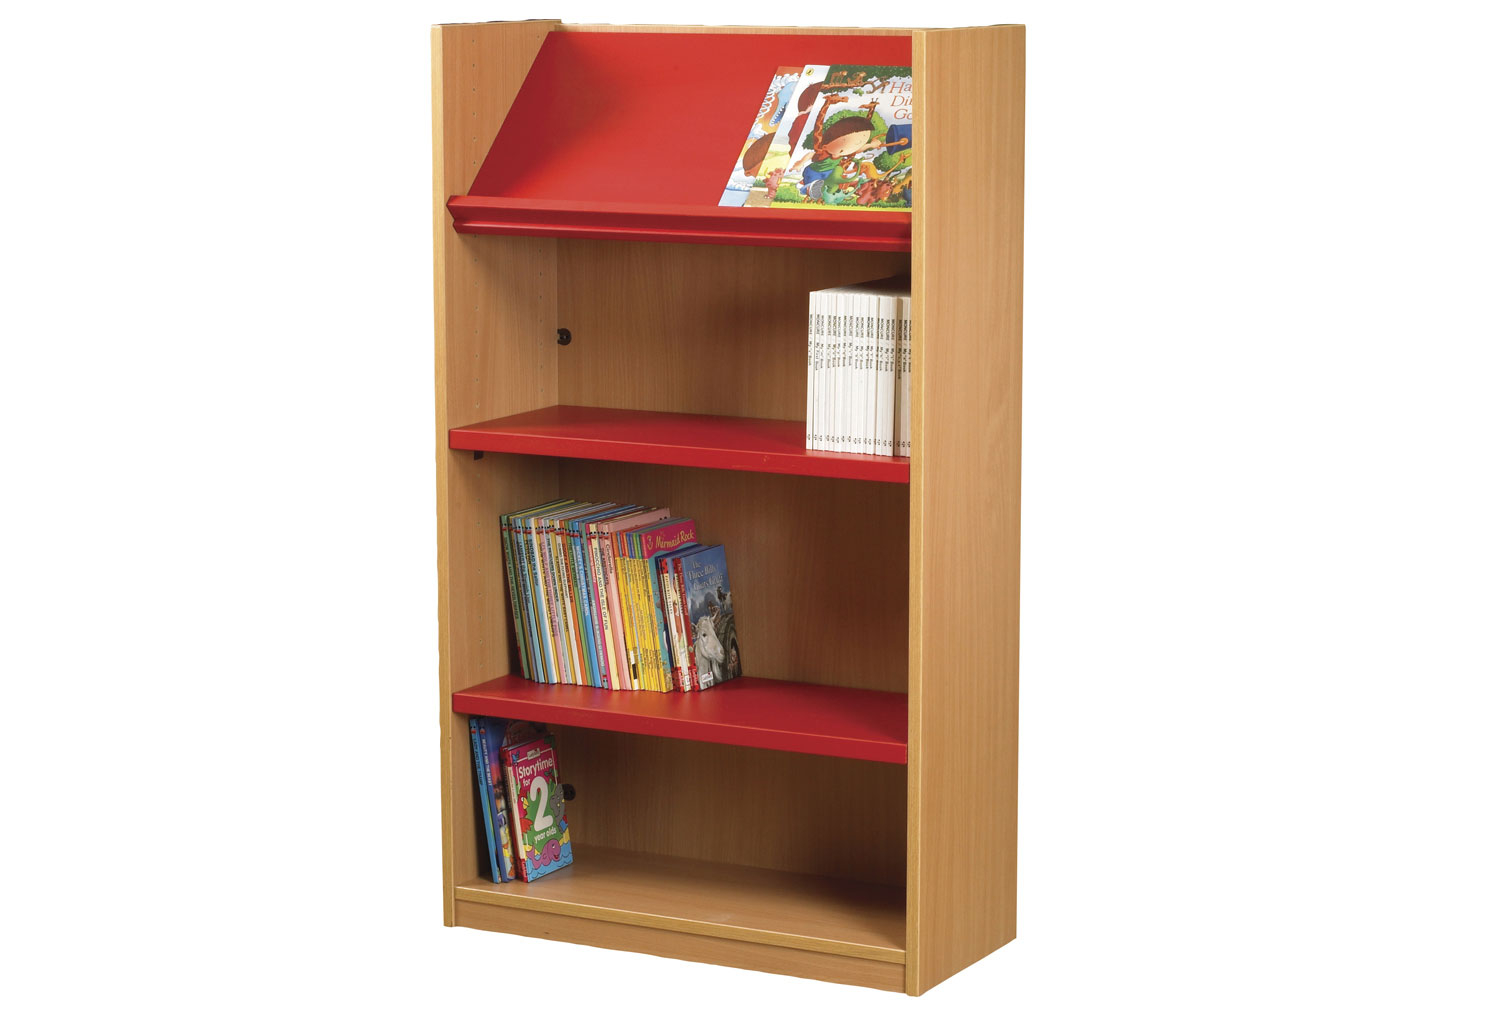 Nucleus Single Sided Classroom Bookcase With Display Top, 54wx31dx90h (cm), Red